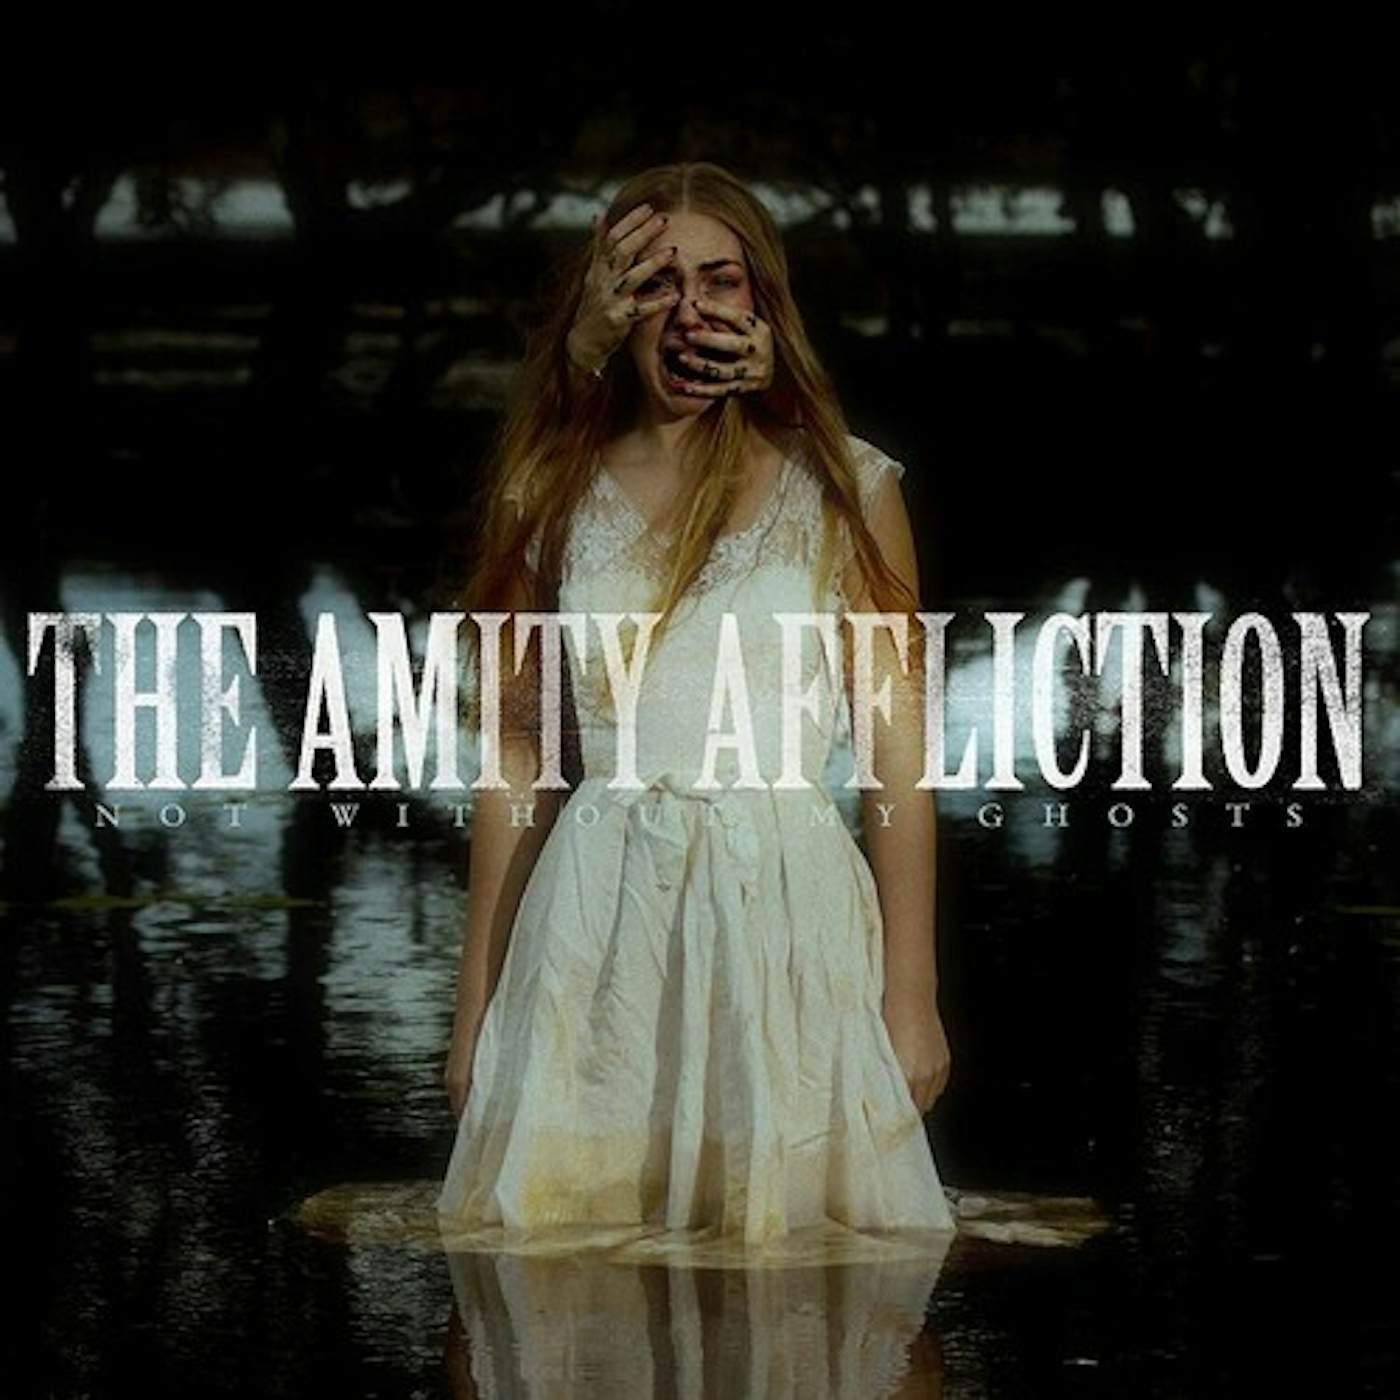 The Amity Affliction Not Without My Ghosts Vinyl Record